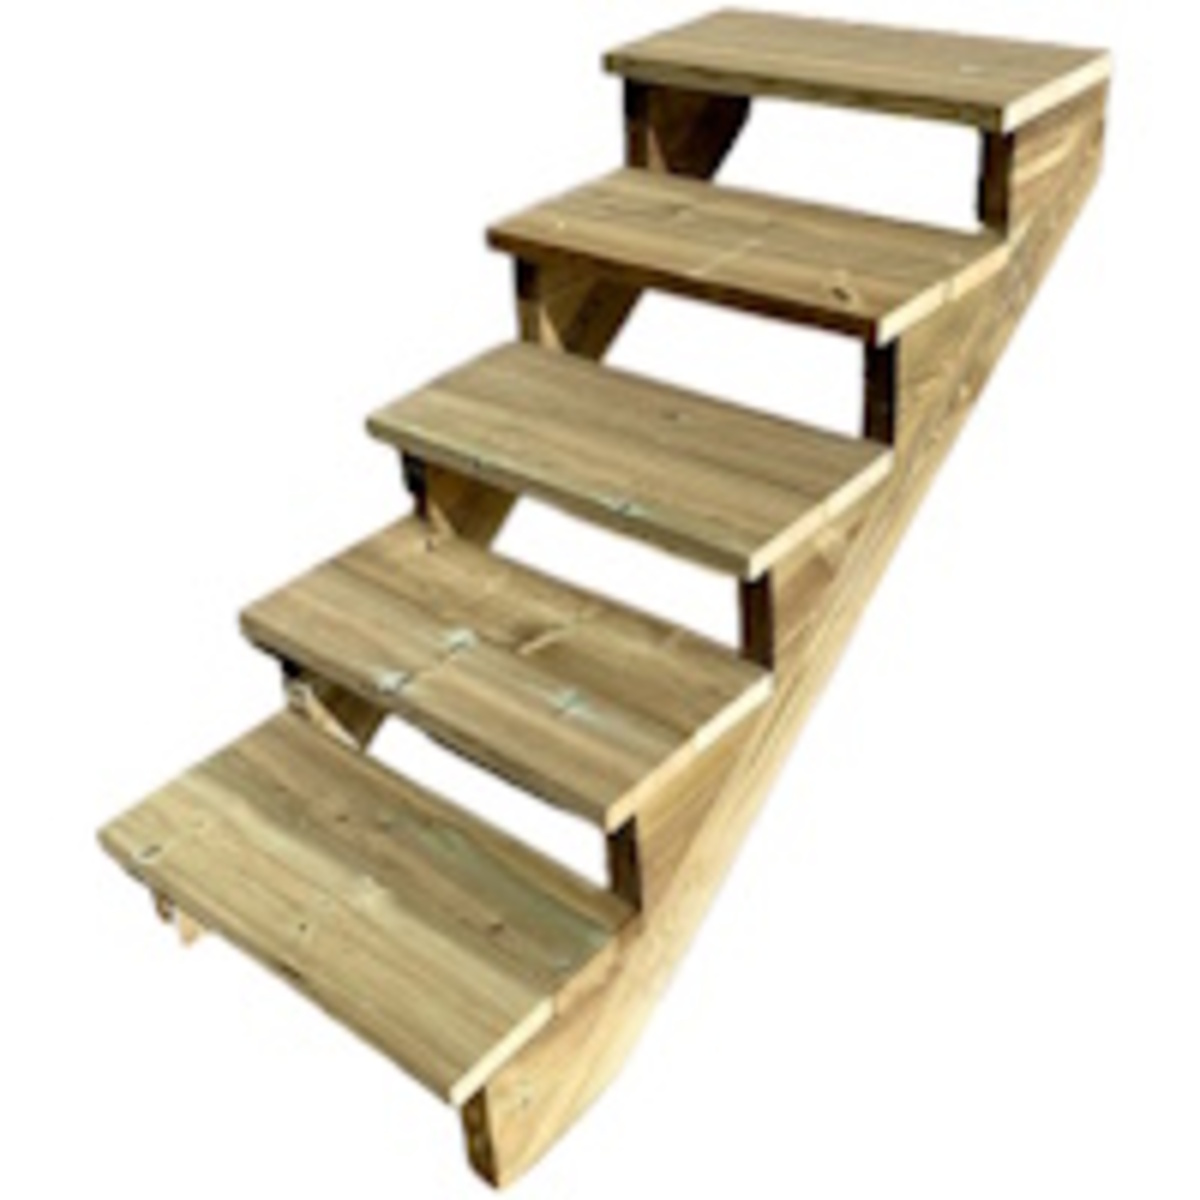 Deck stairs wood 5 steps type C - height 88cm